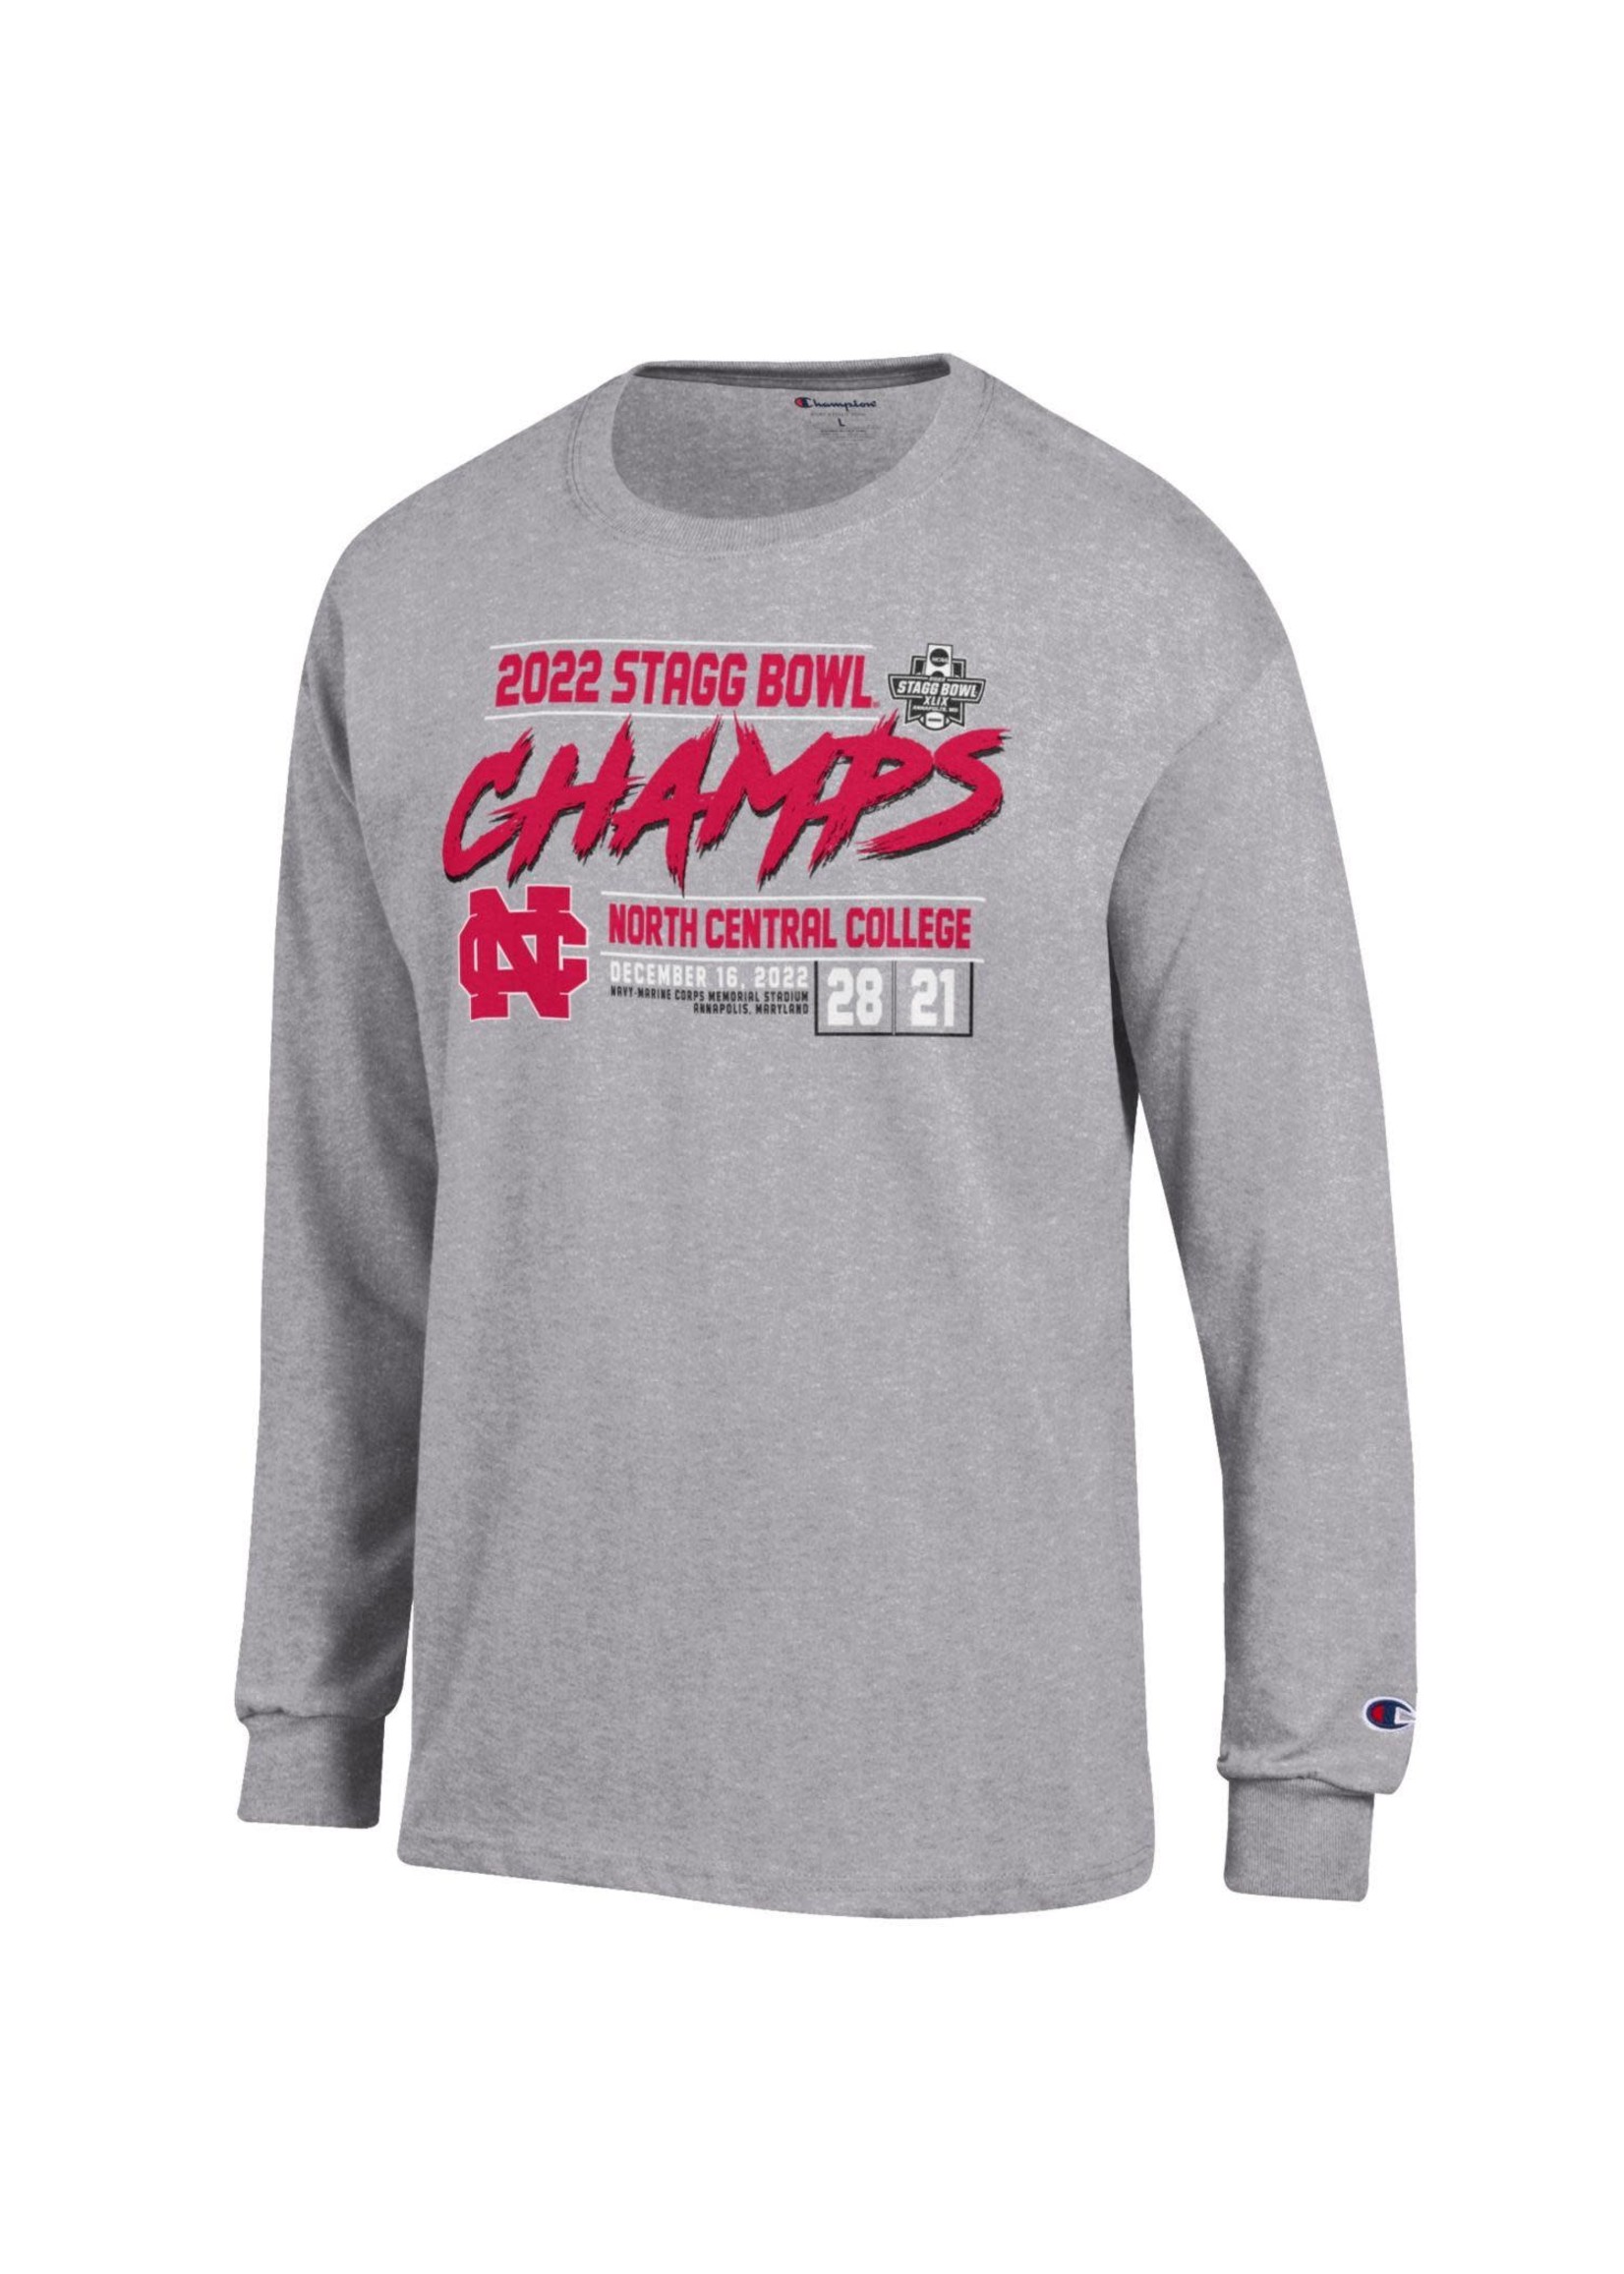 2022 Stagg Bowl Long Sleeve Tee w/score by Champion - North Central College  Campus Store